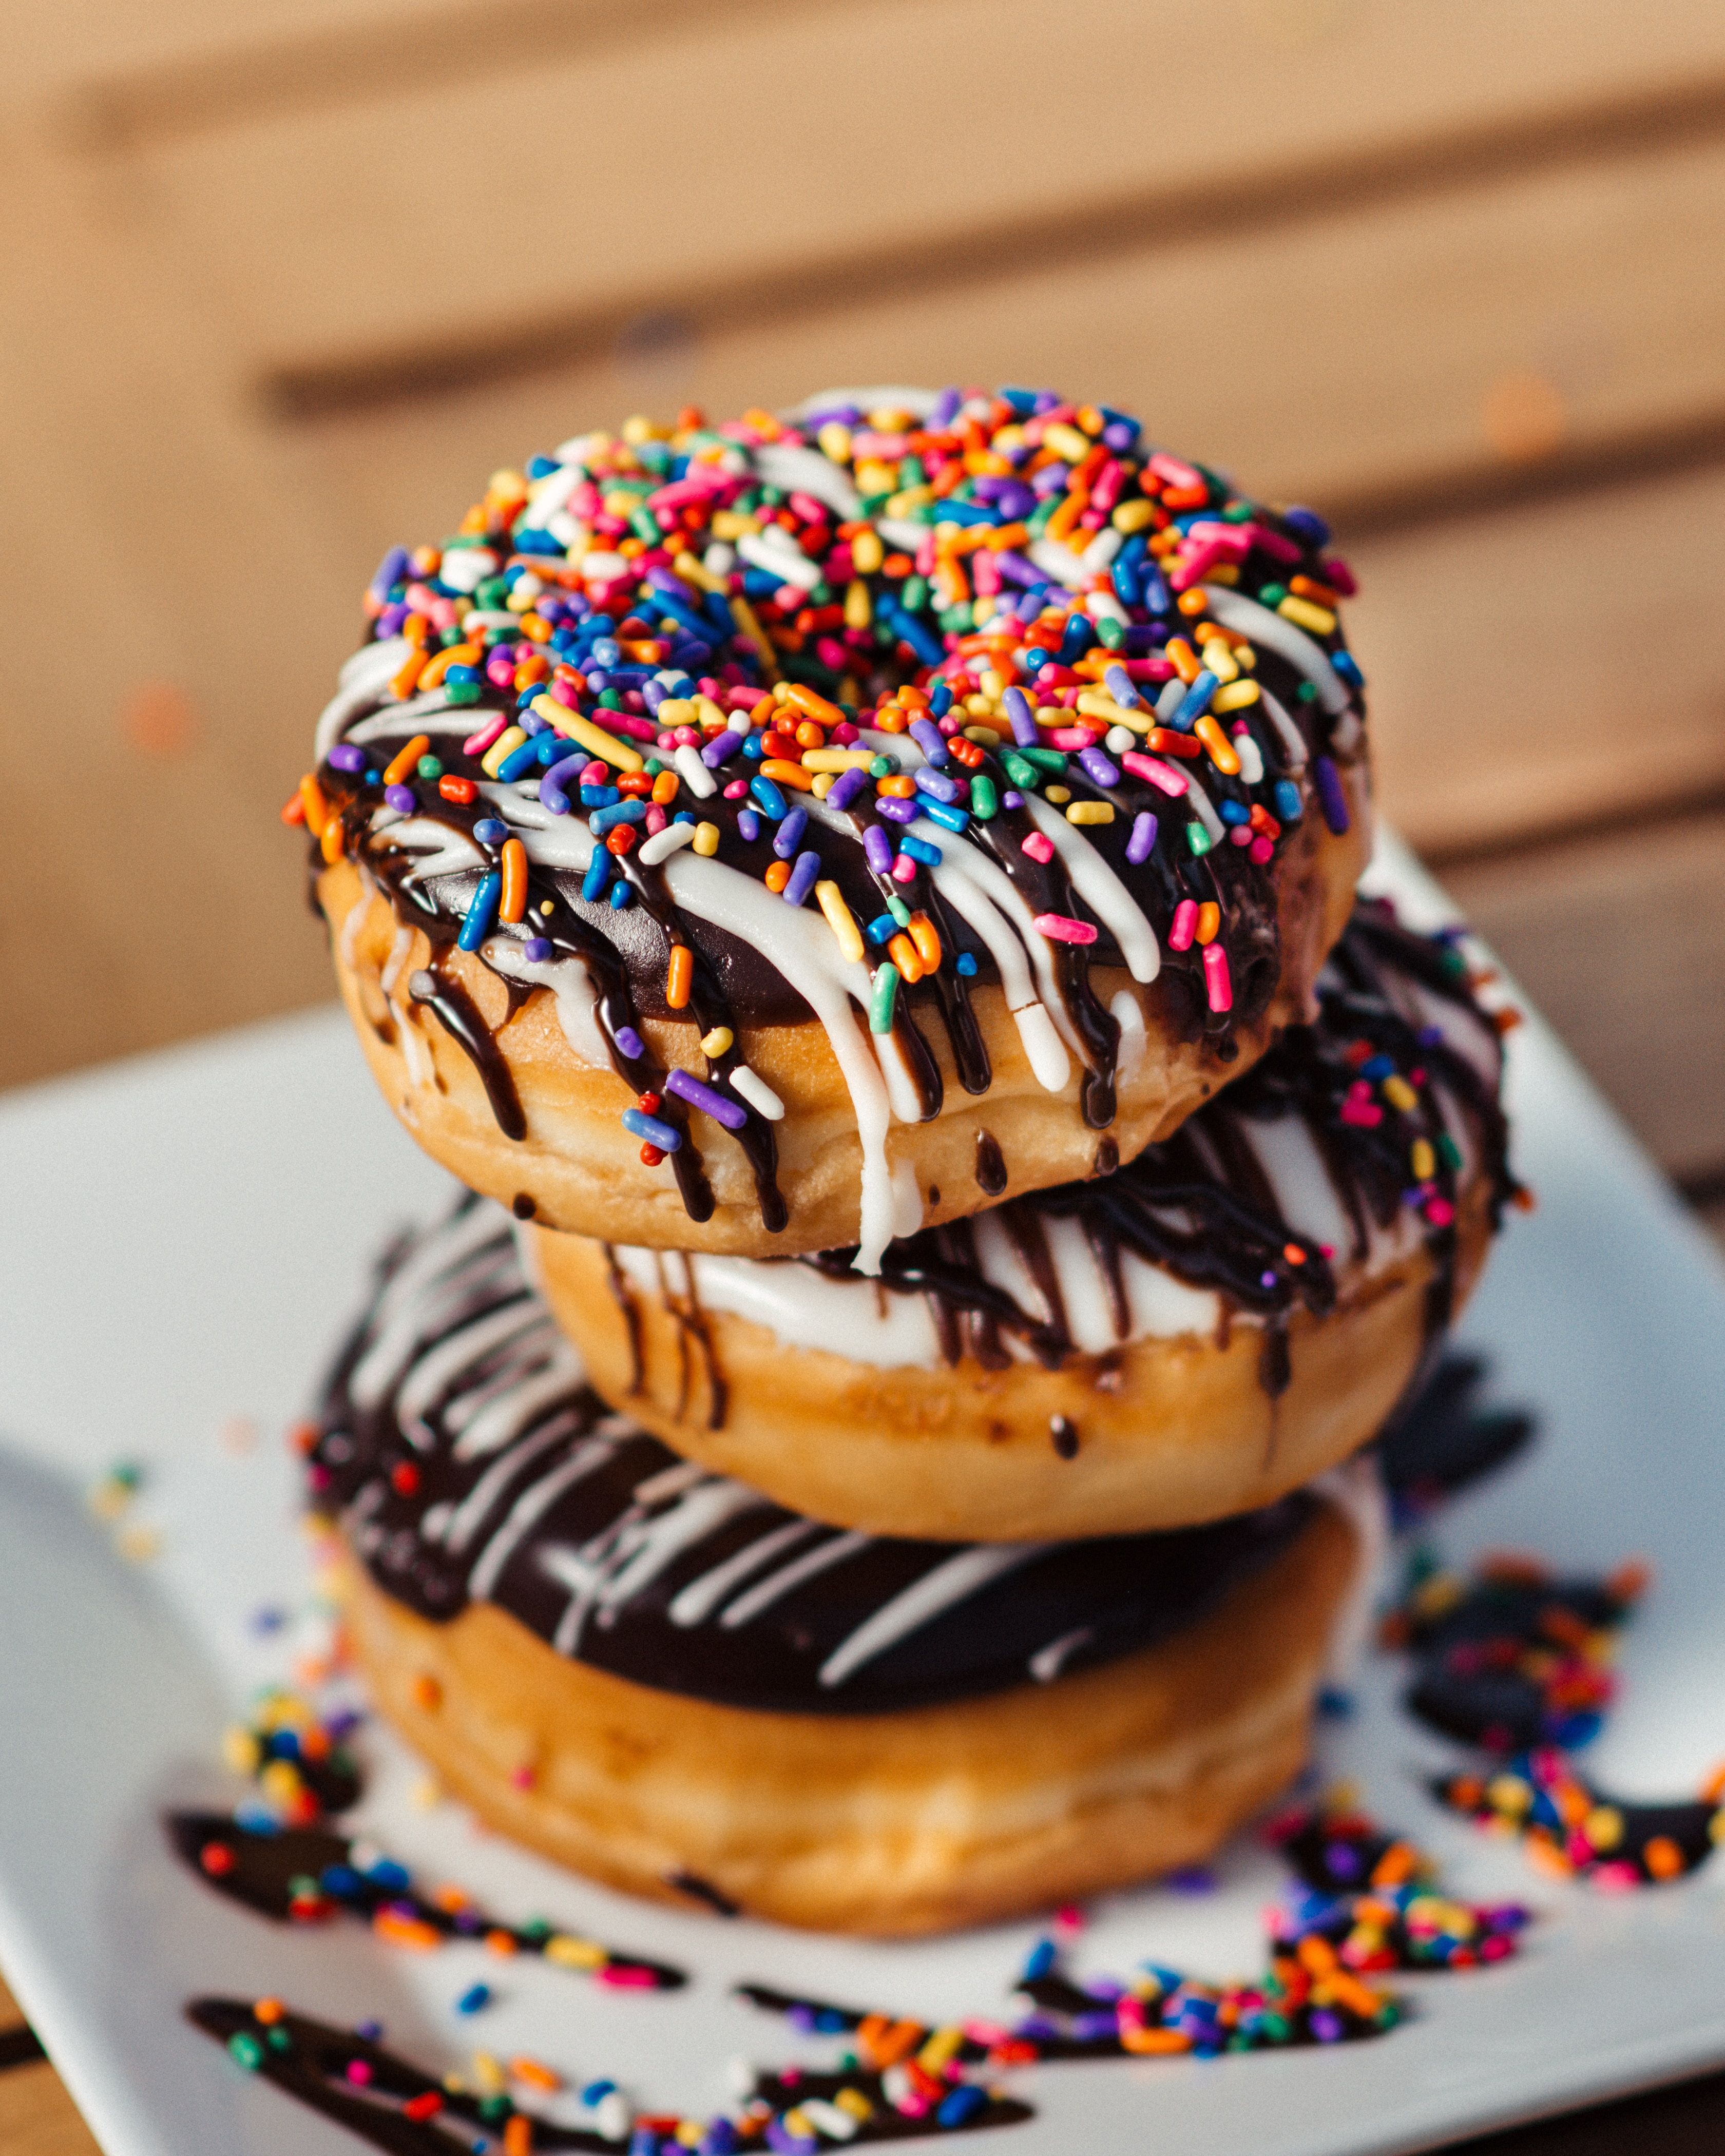 A stack of donuts with sprinkles on top - Bakery, foodie